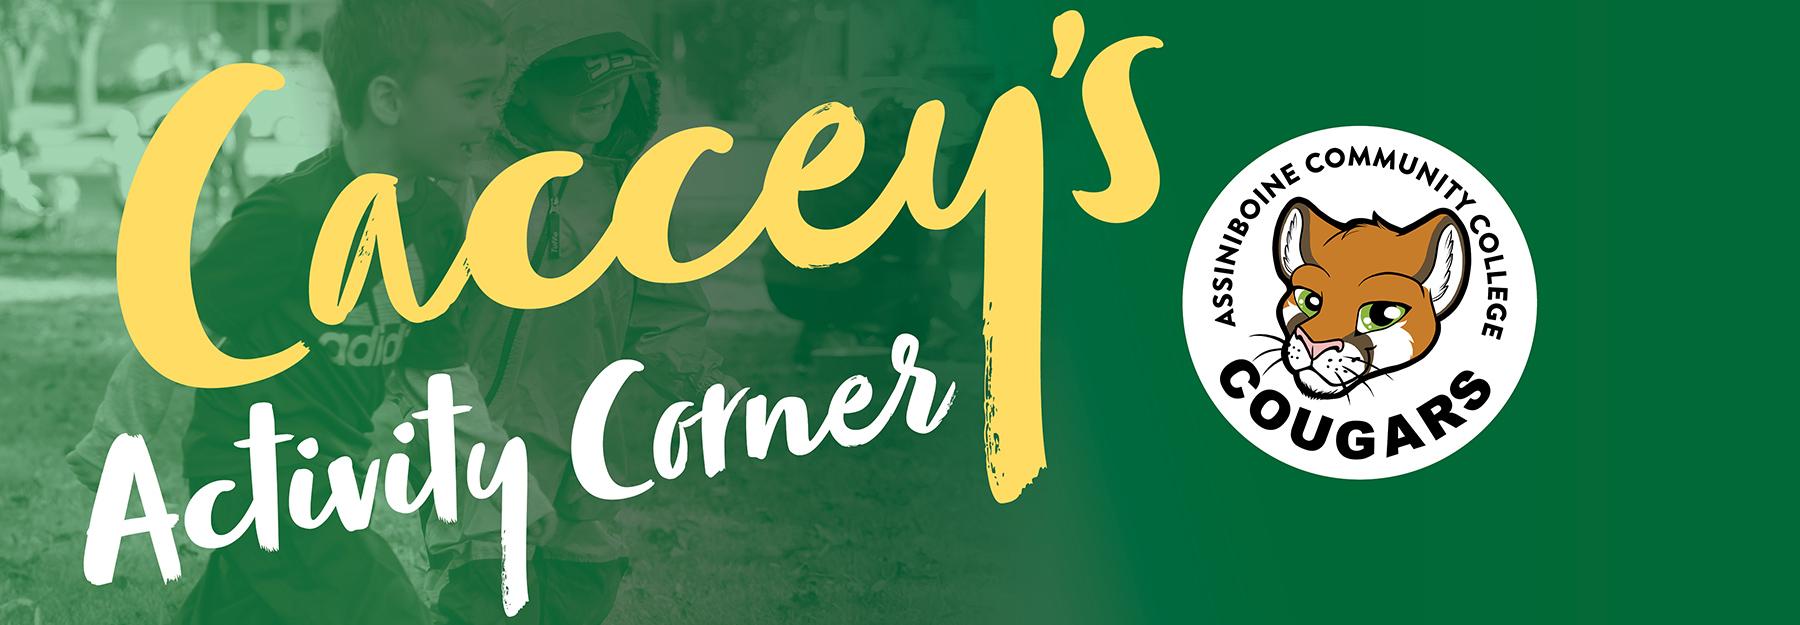 Caccey's Activity Corner banner.